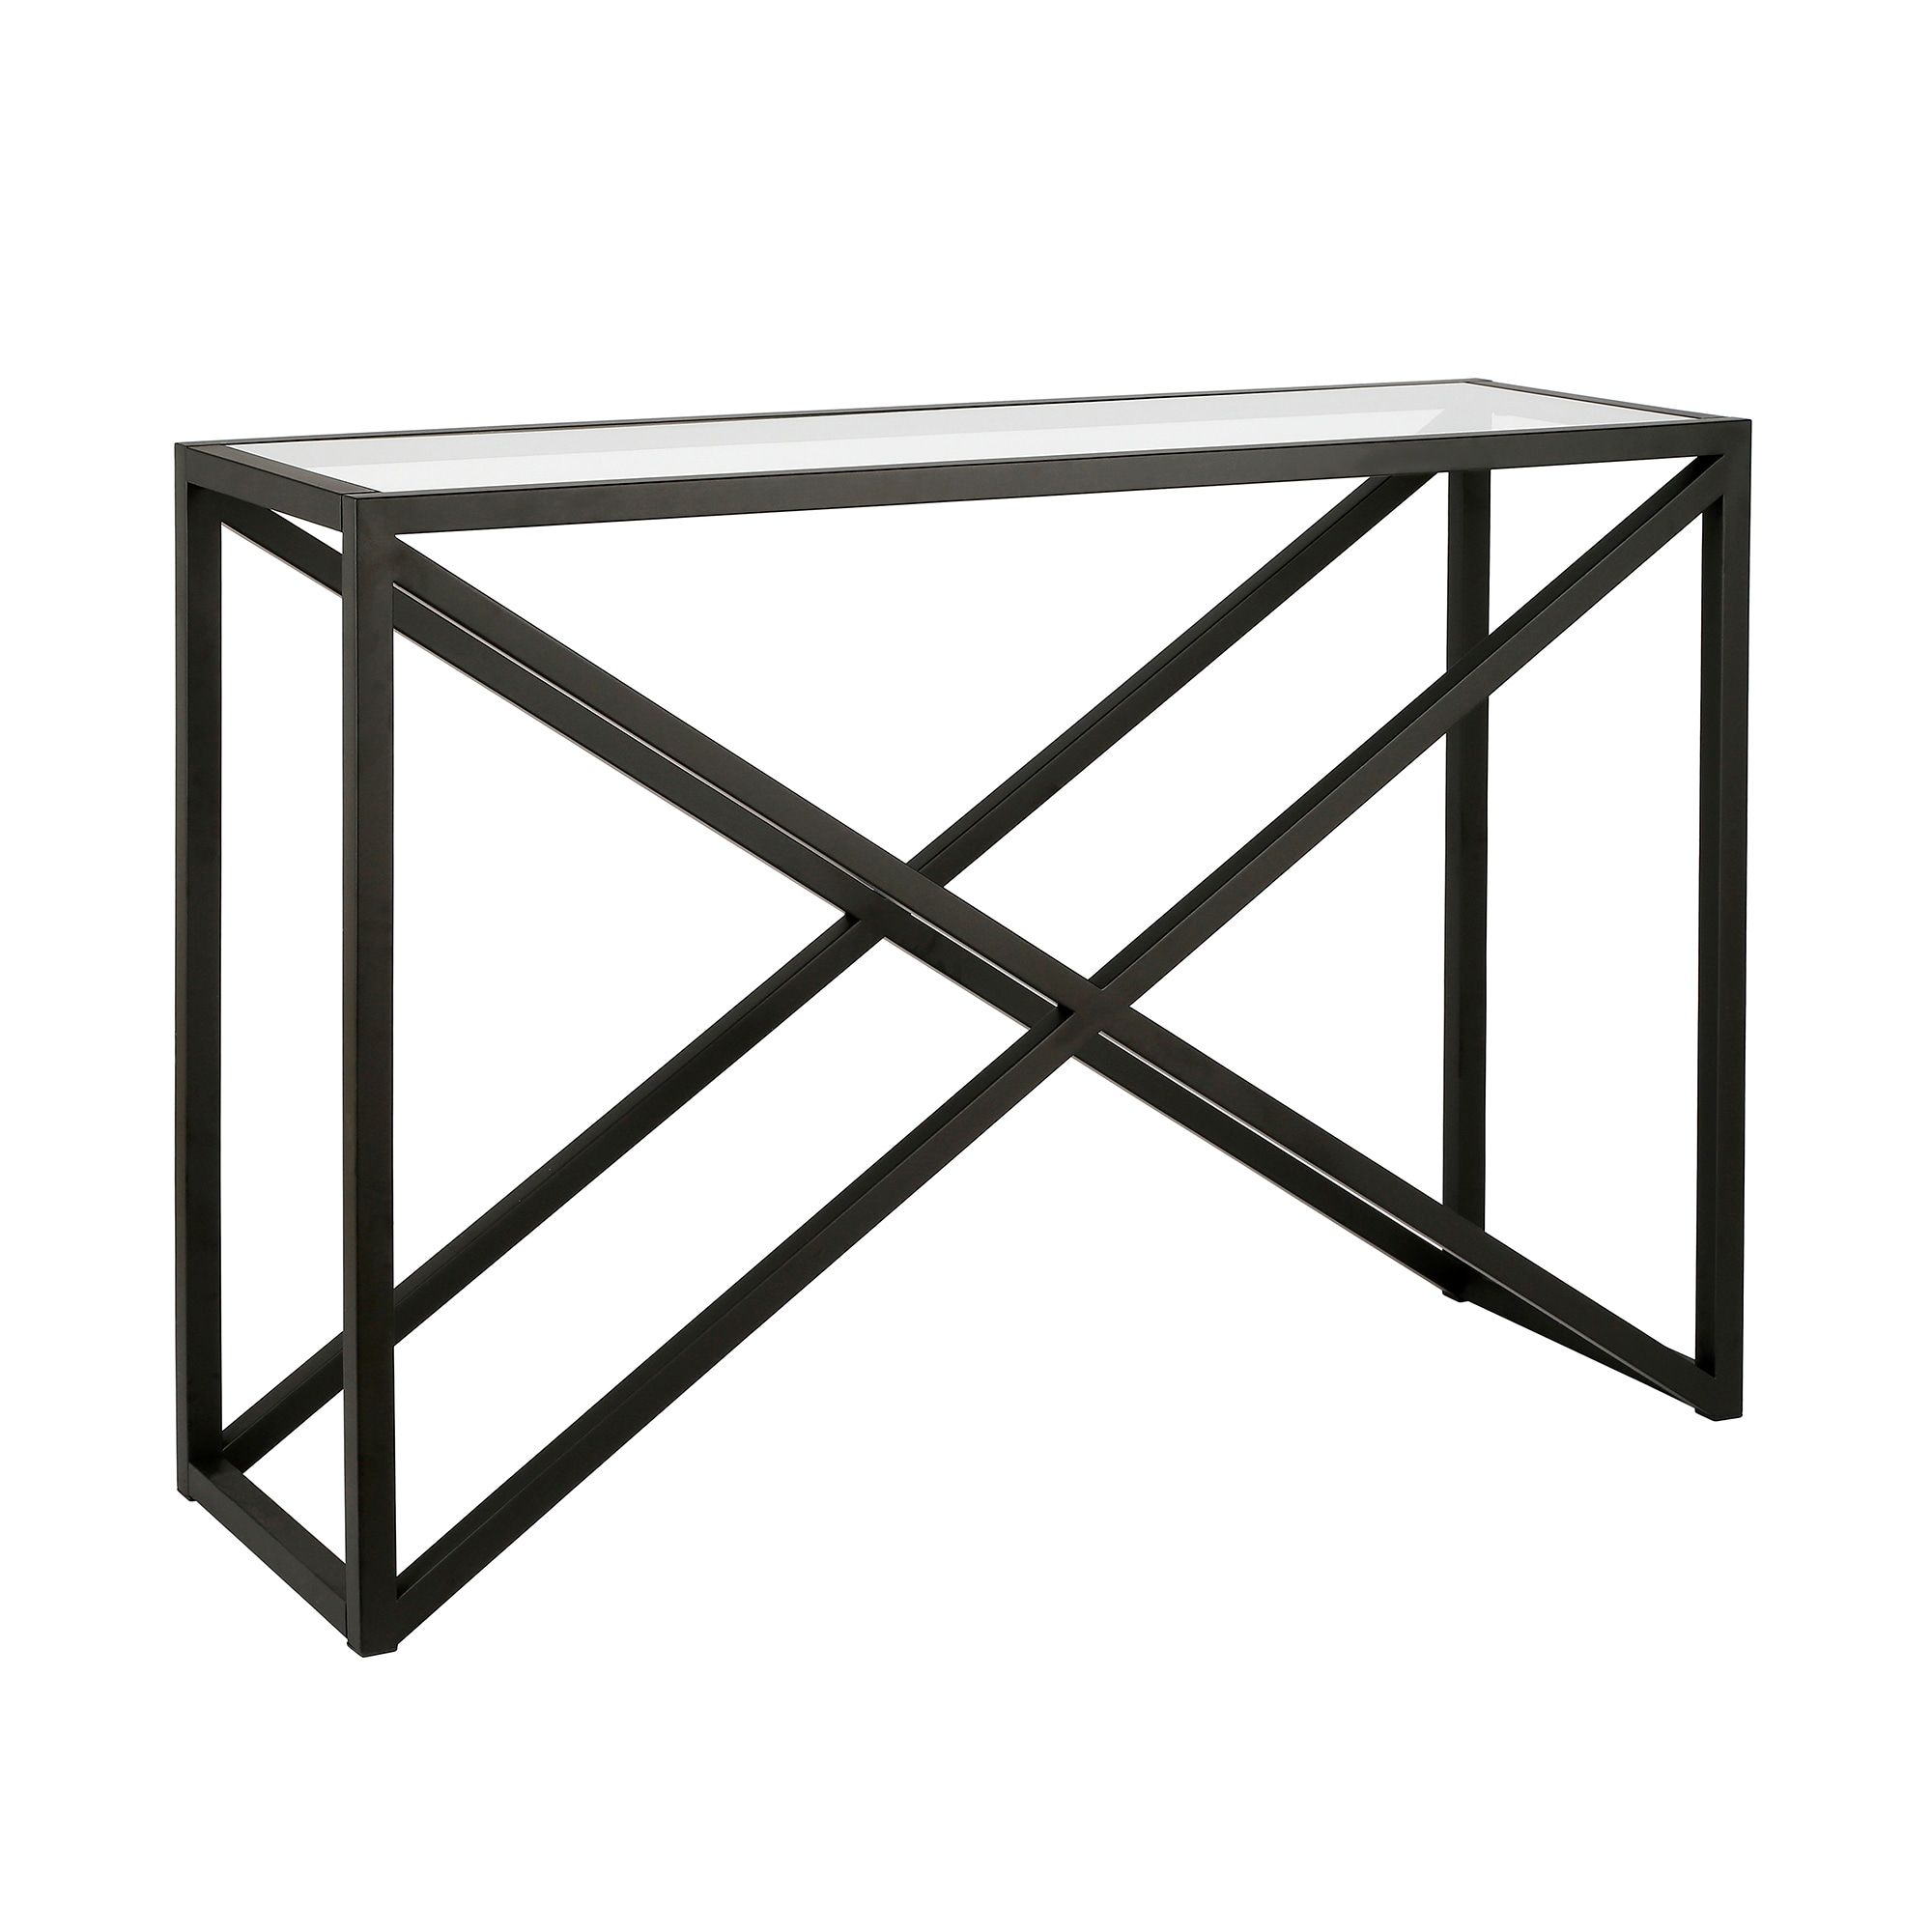 Hailey Home Calix Console Tables At Lowes With Regard To Addison&lane Calix Square Tables (View 7 of 20)